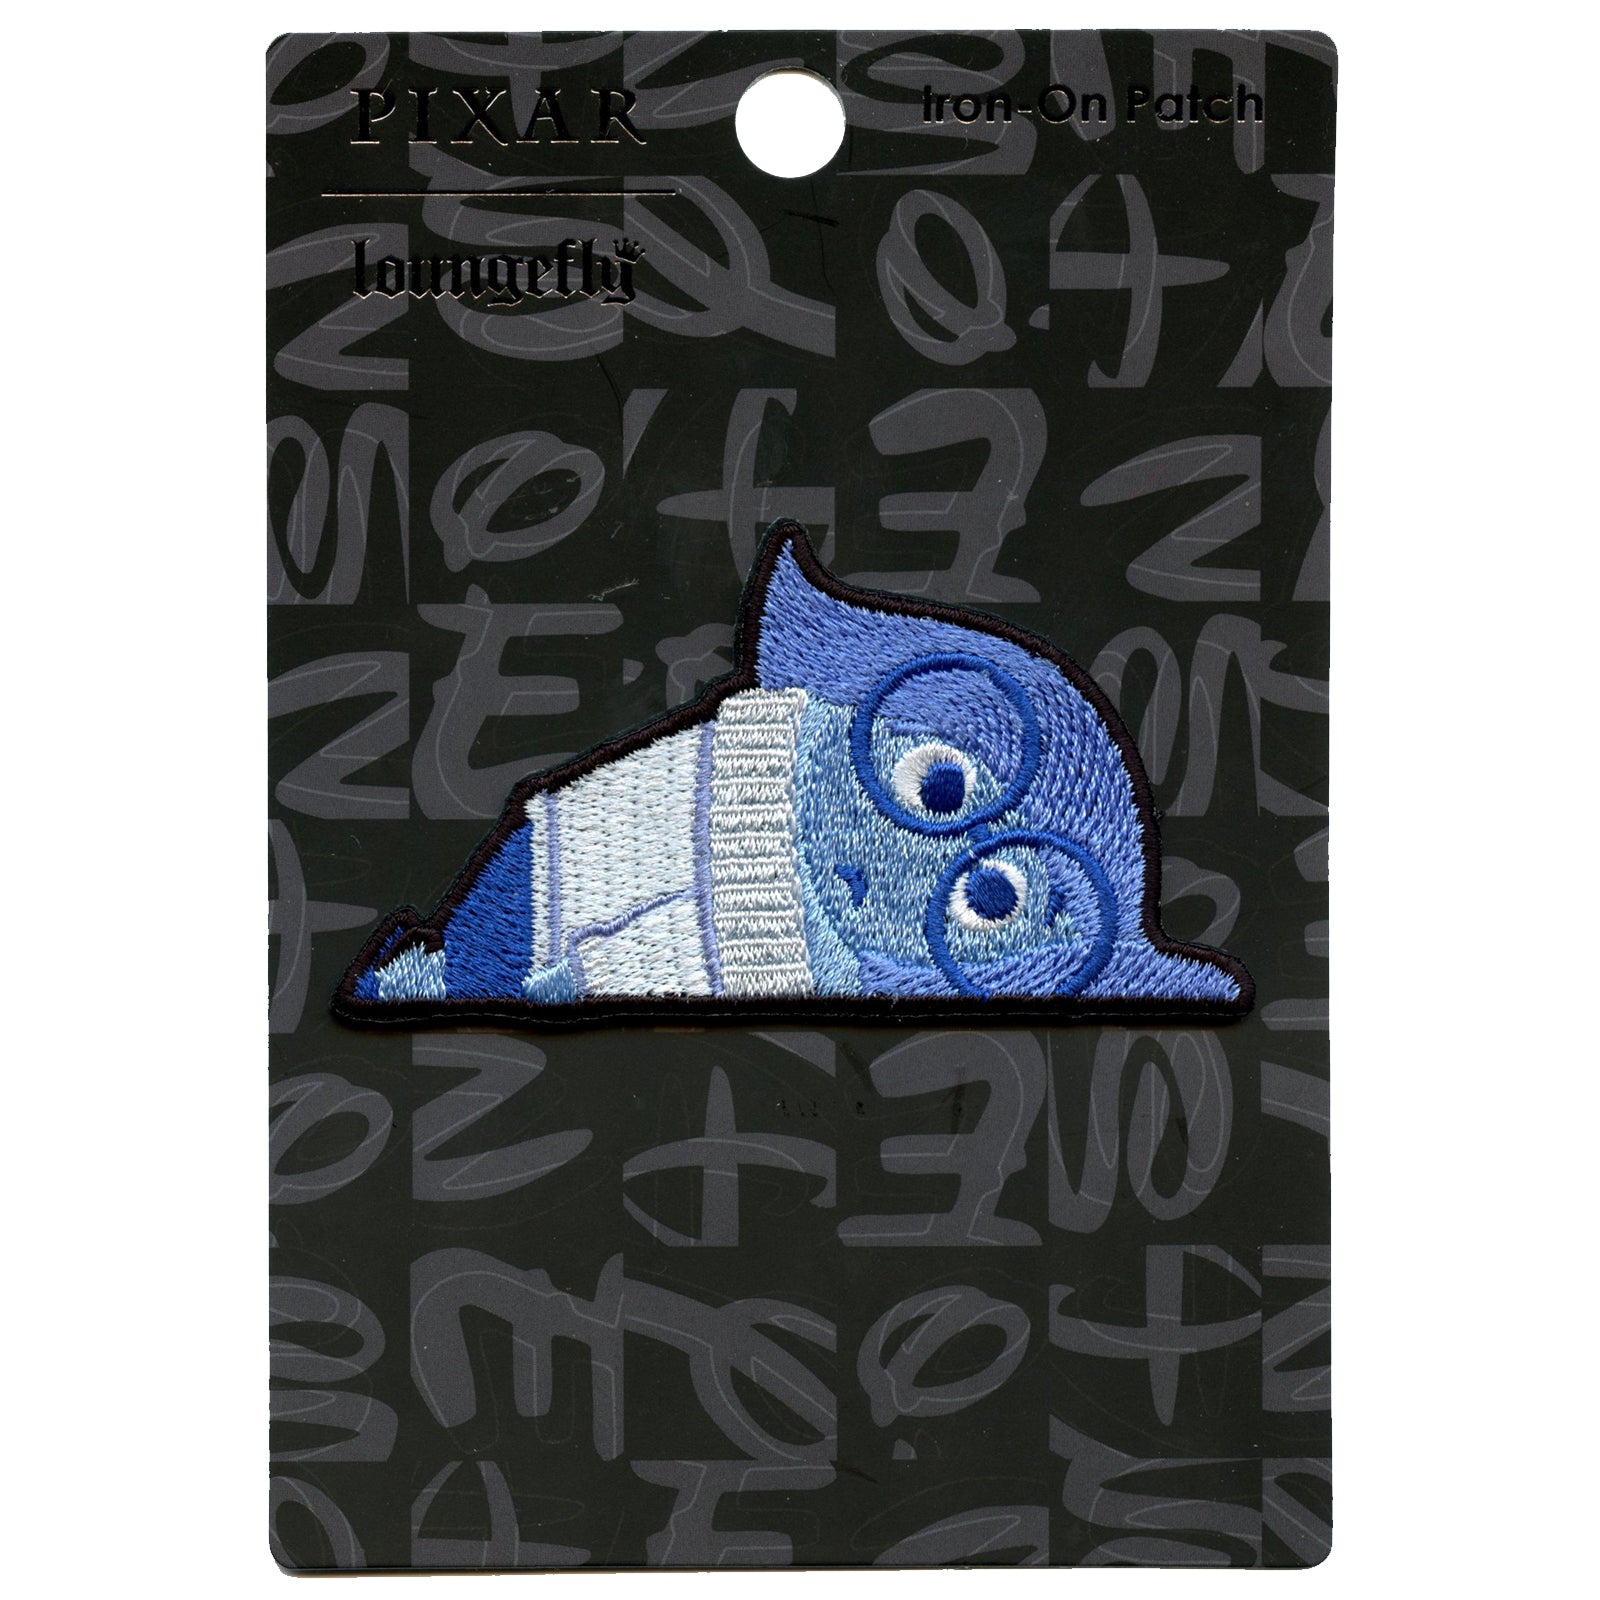 Official Disney's Inside Out Sadness Embroidered Iron On Applique Patch 